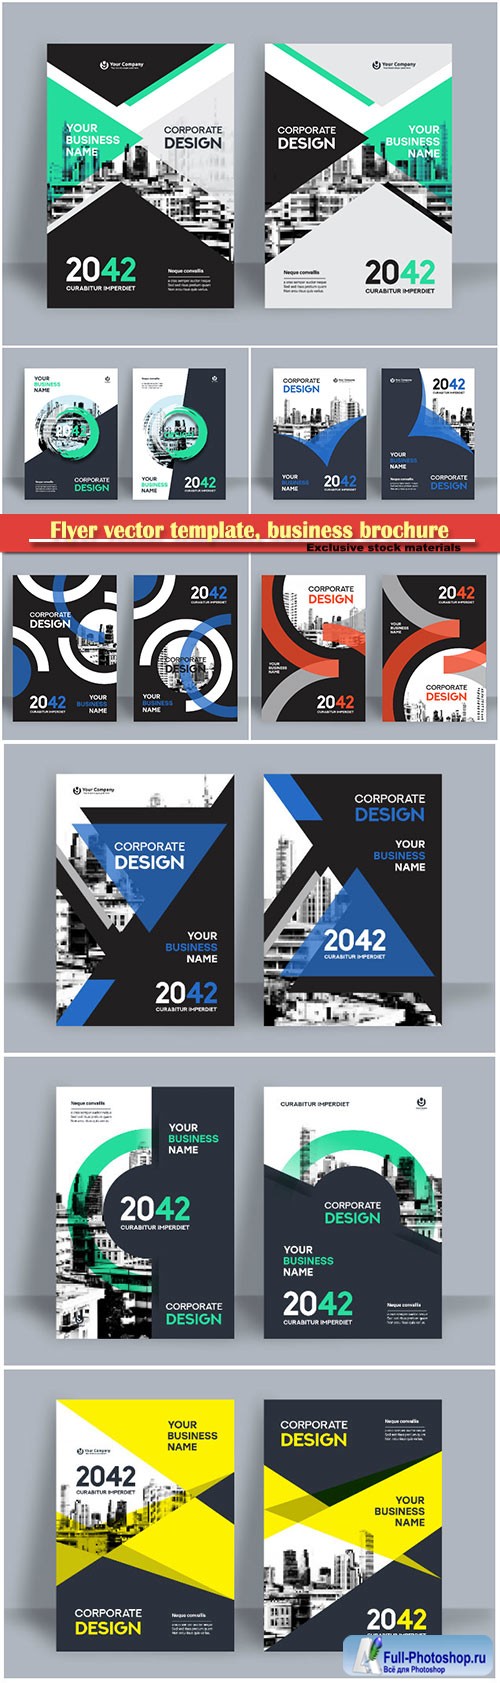 Flyer vector template, business brochure, magazine cover # 15